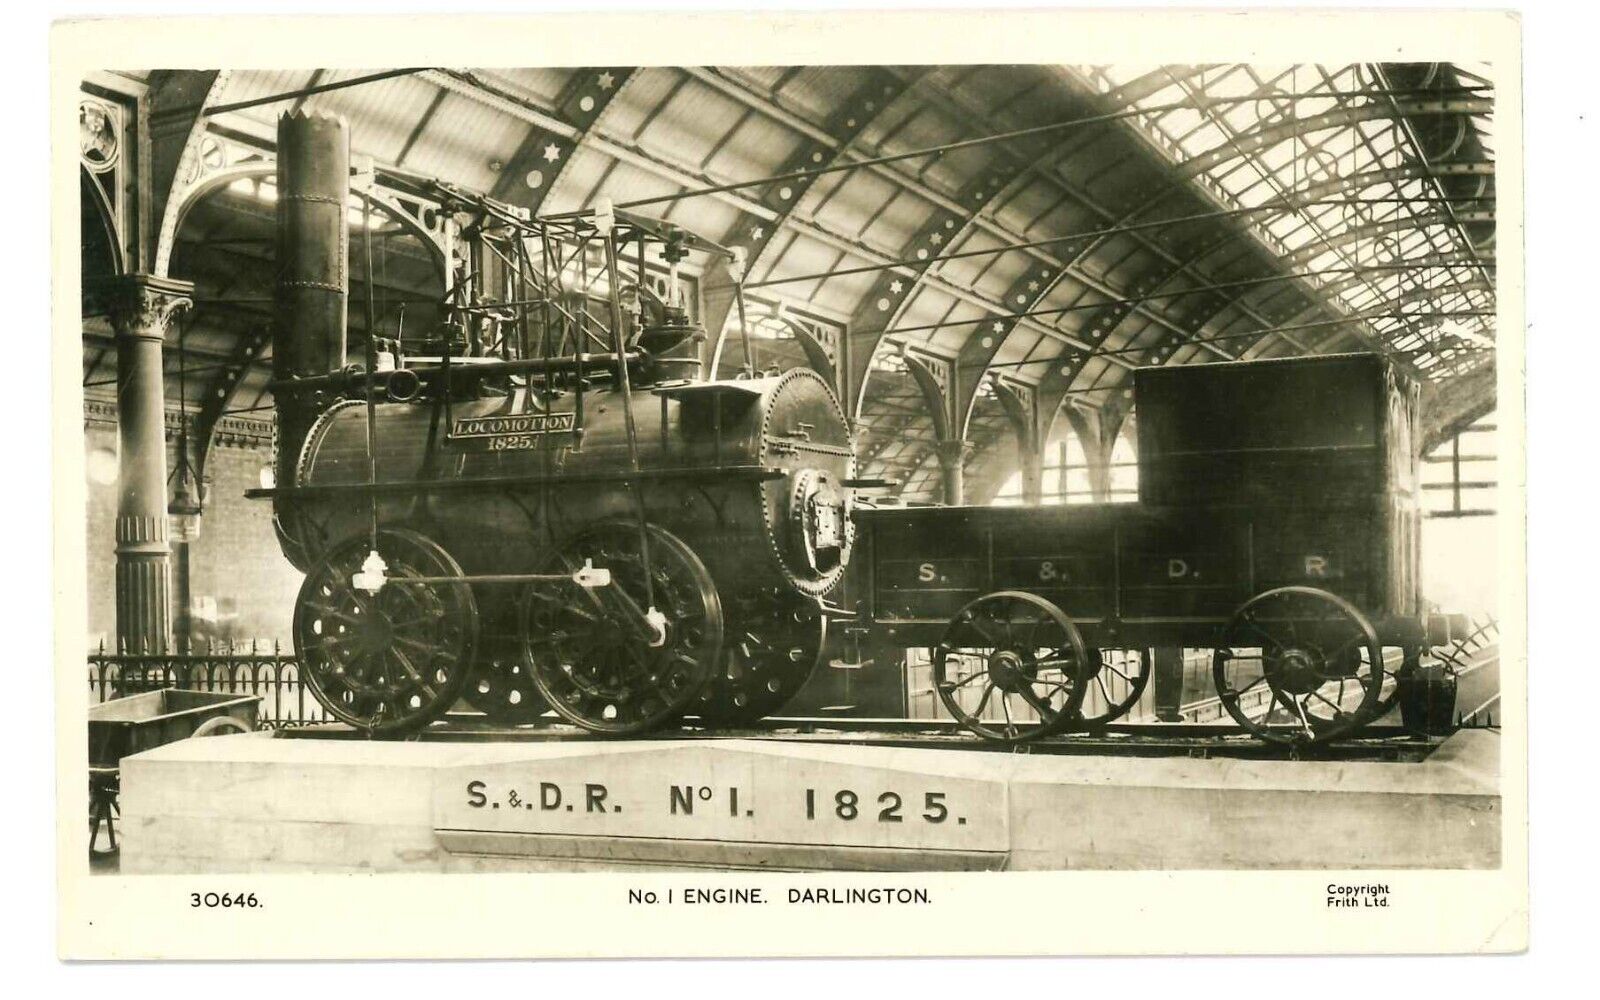 House Clearance - No. 1 Engine, Darlington. Service by Frith,